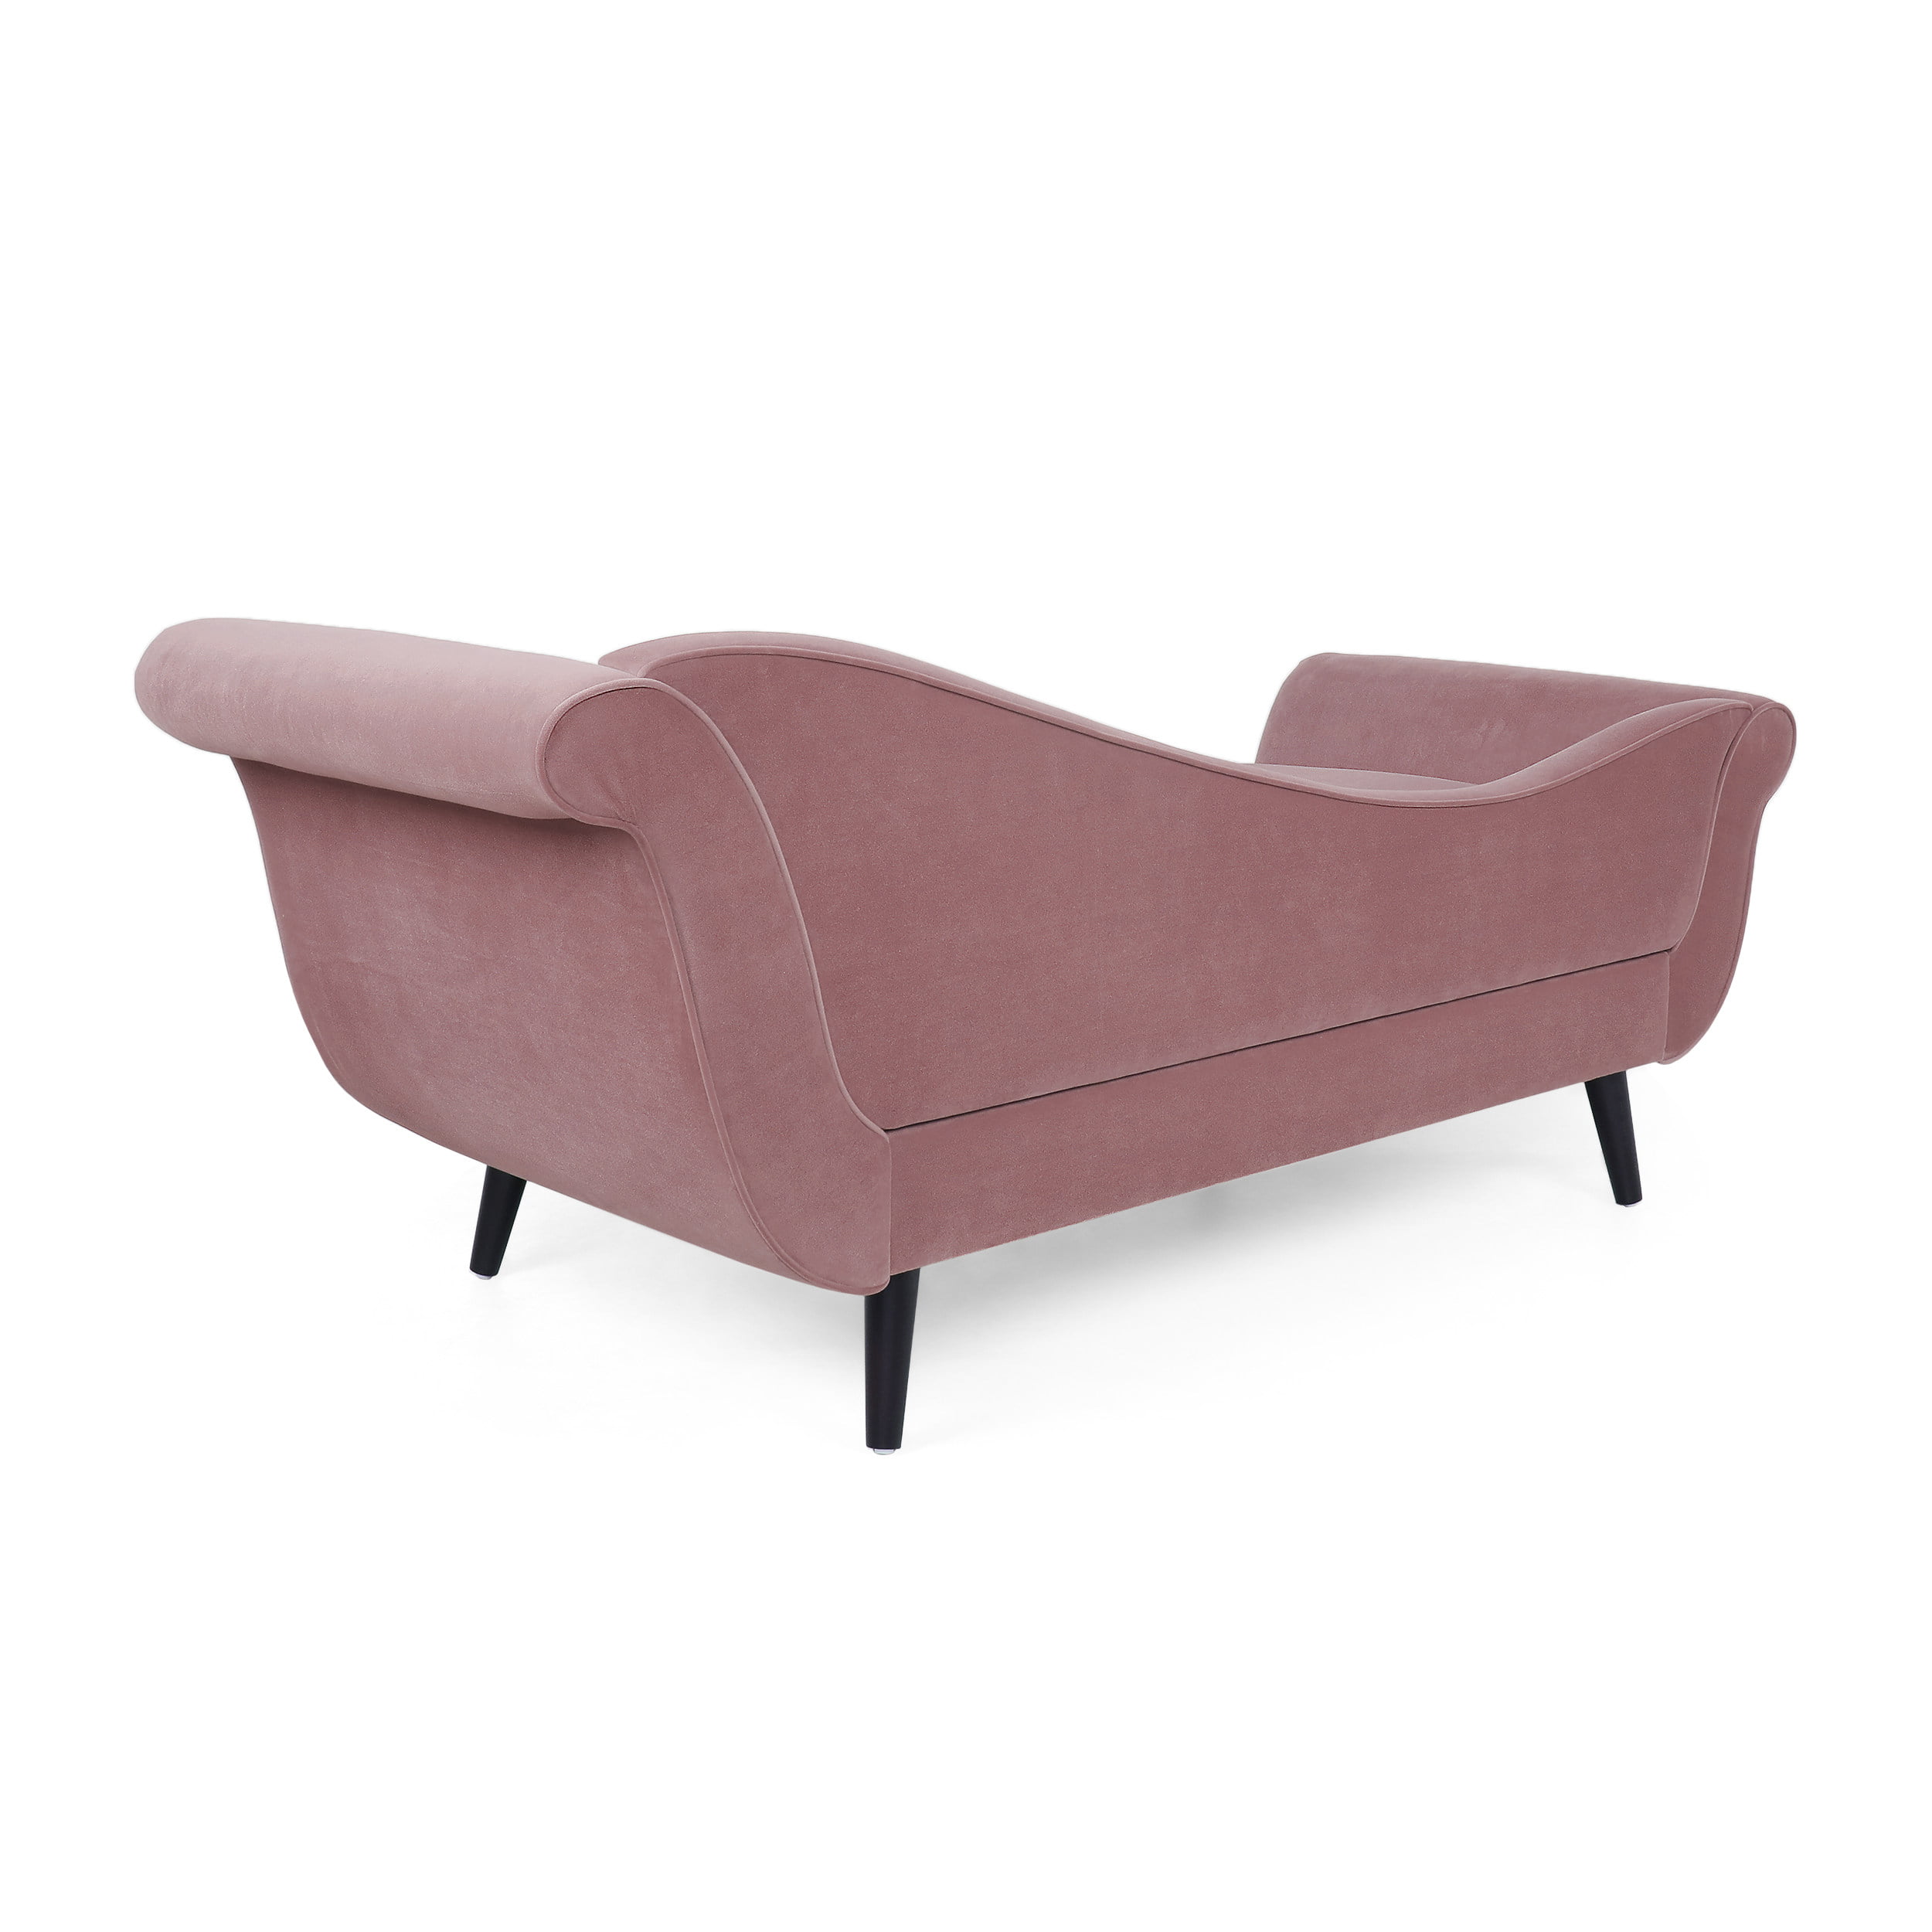 GDF Studio Jakyrah Contemporary Chaise Lounge with Scroll Arms